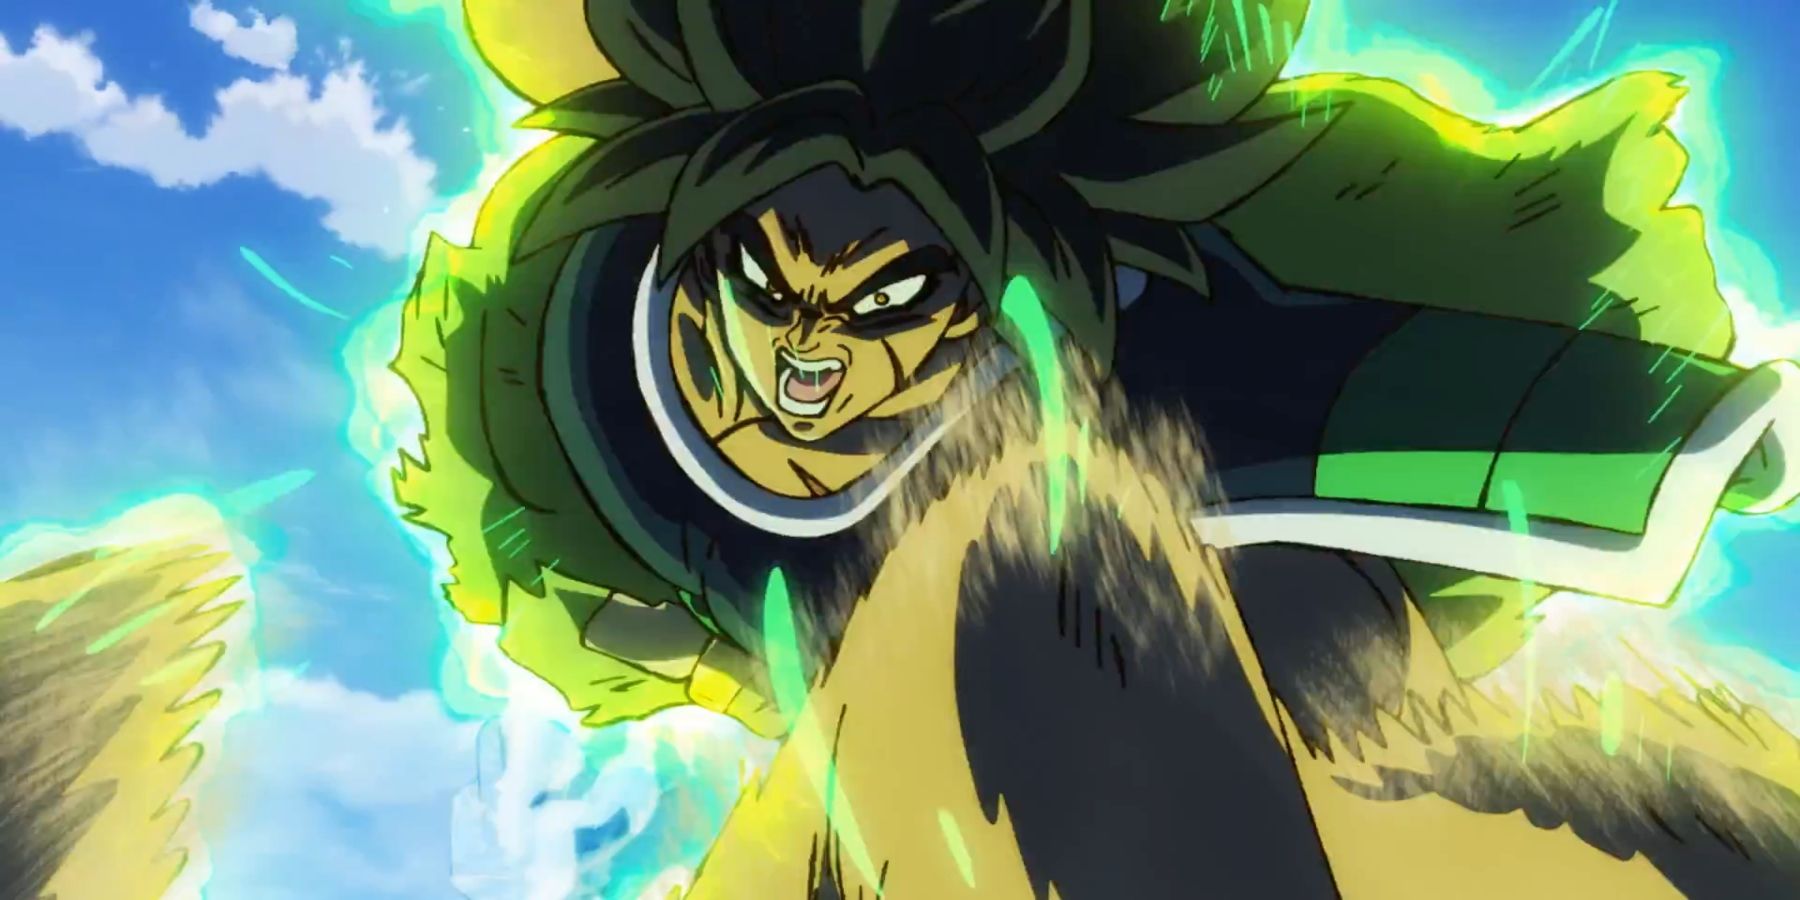 The Legendary Saiyan Broly attacks during the events of Dragon Ball Super: Broly